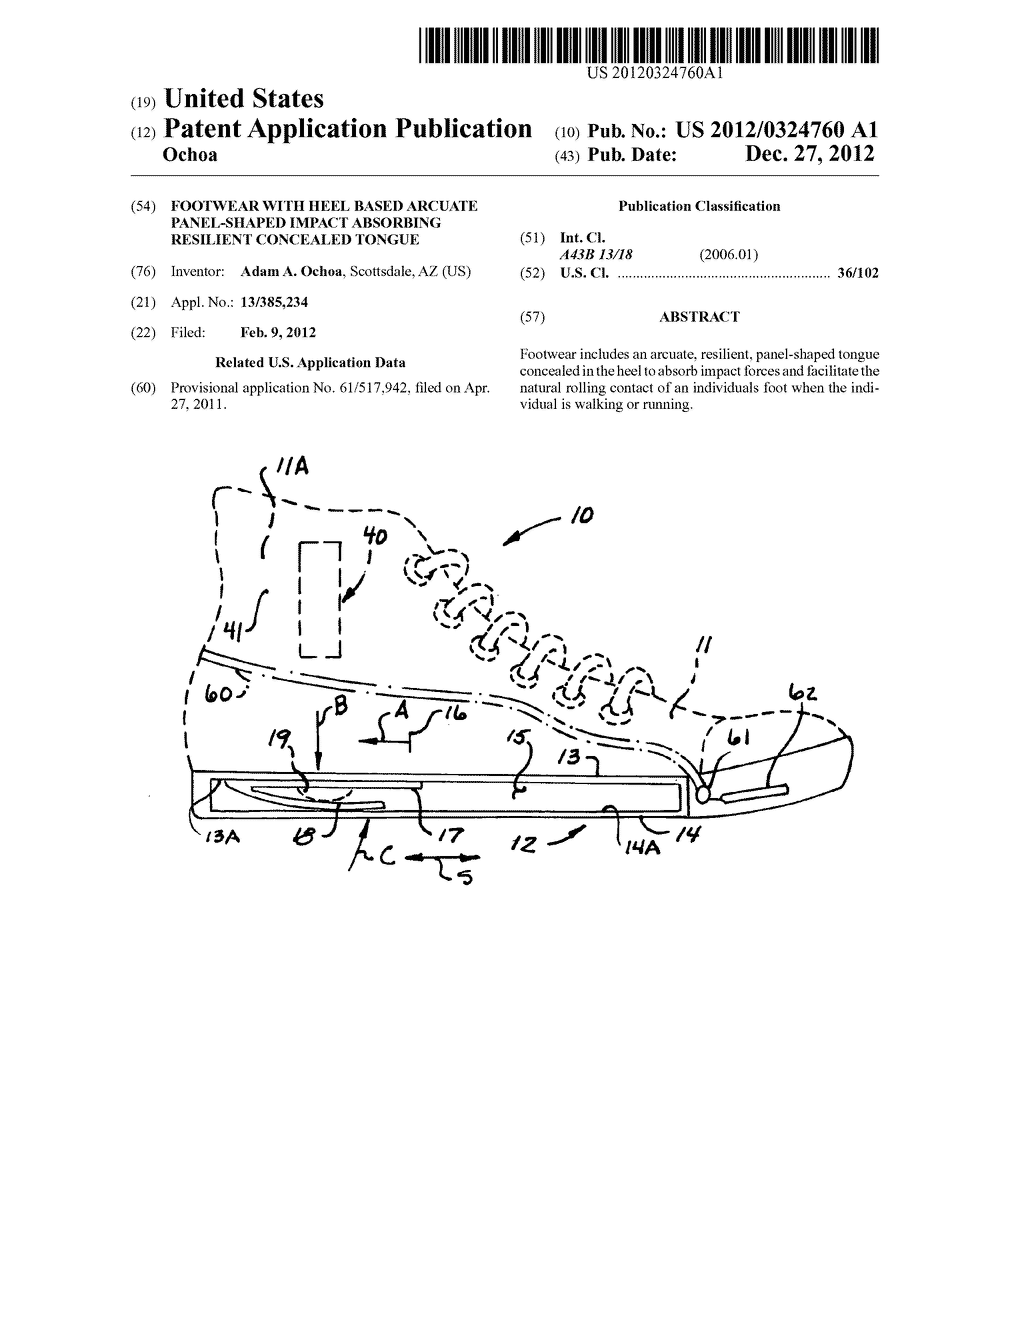 Footwear with heel based arcuate panel-shaped impact absorbing resilient     concealed tongue - diagram, schematic, and image 01